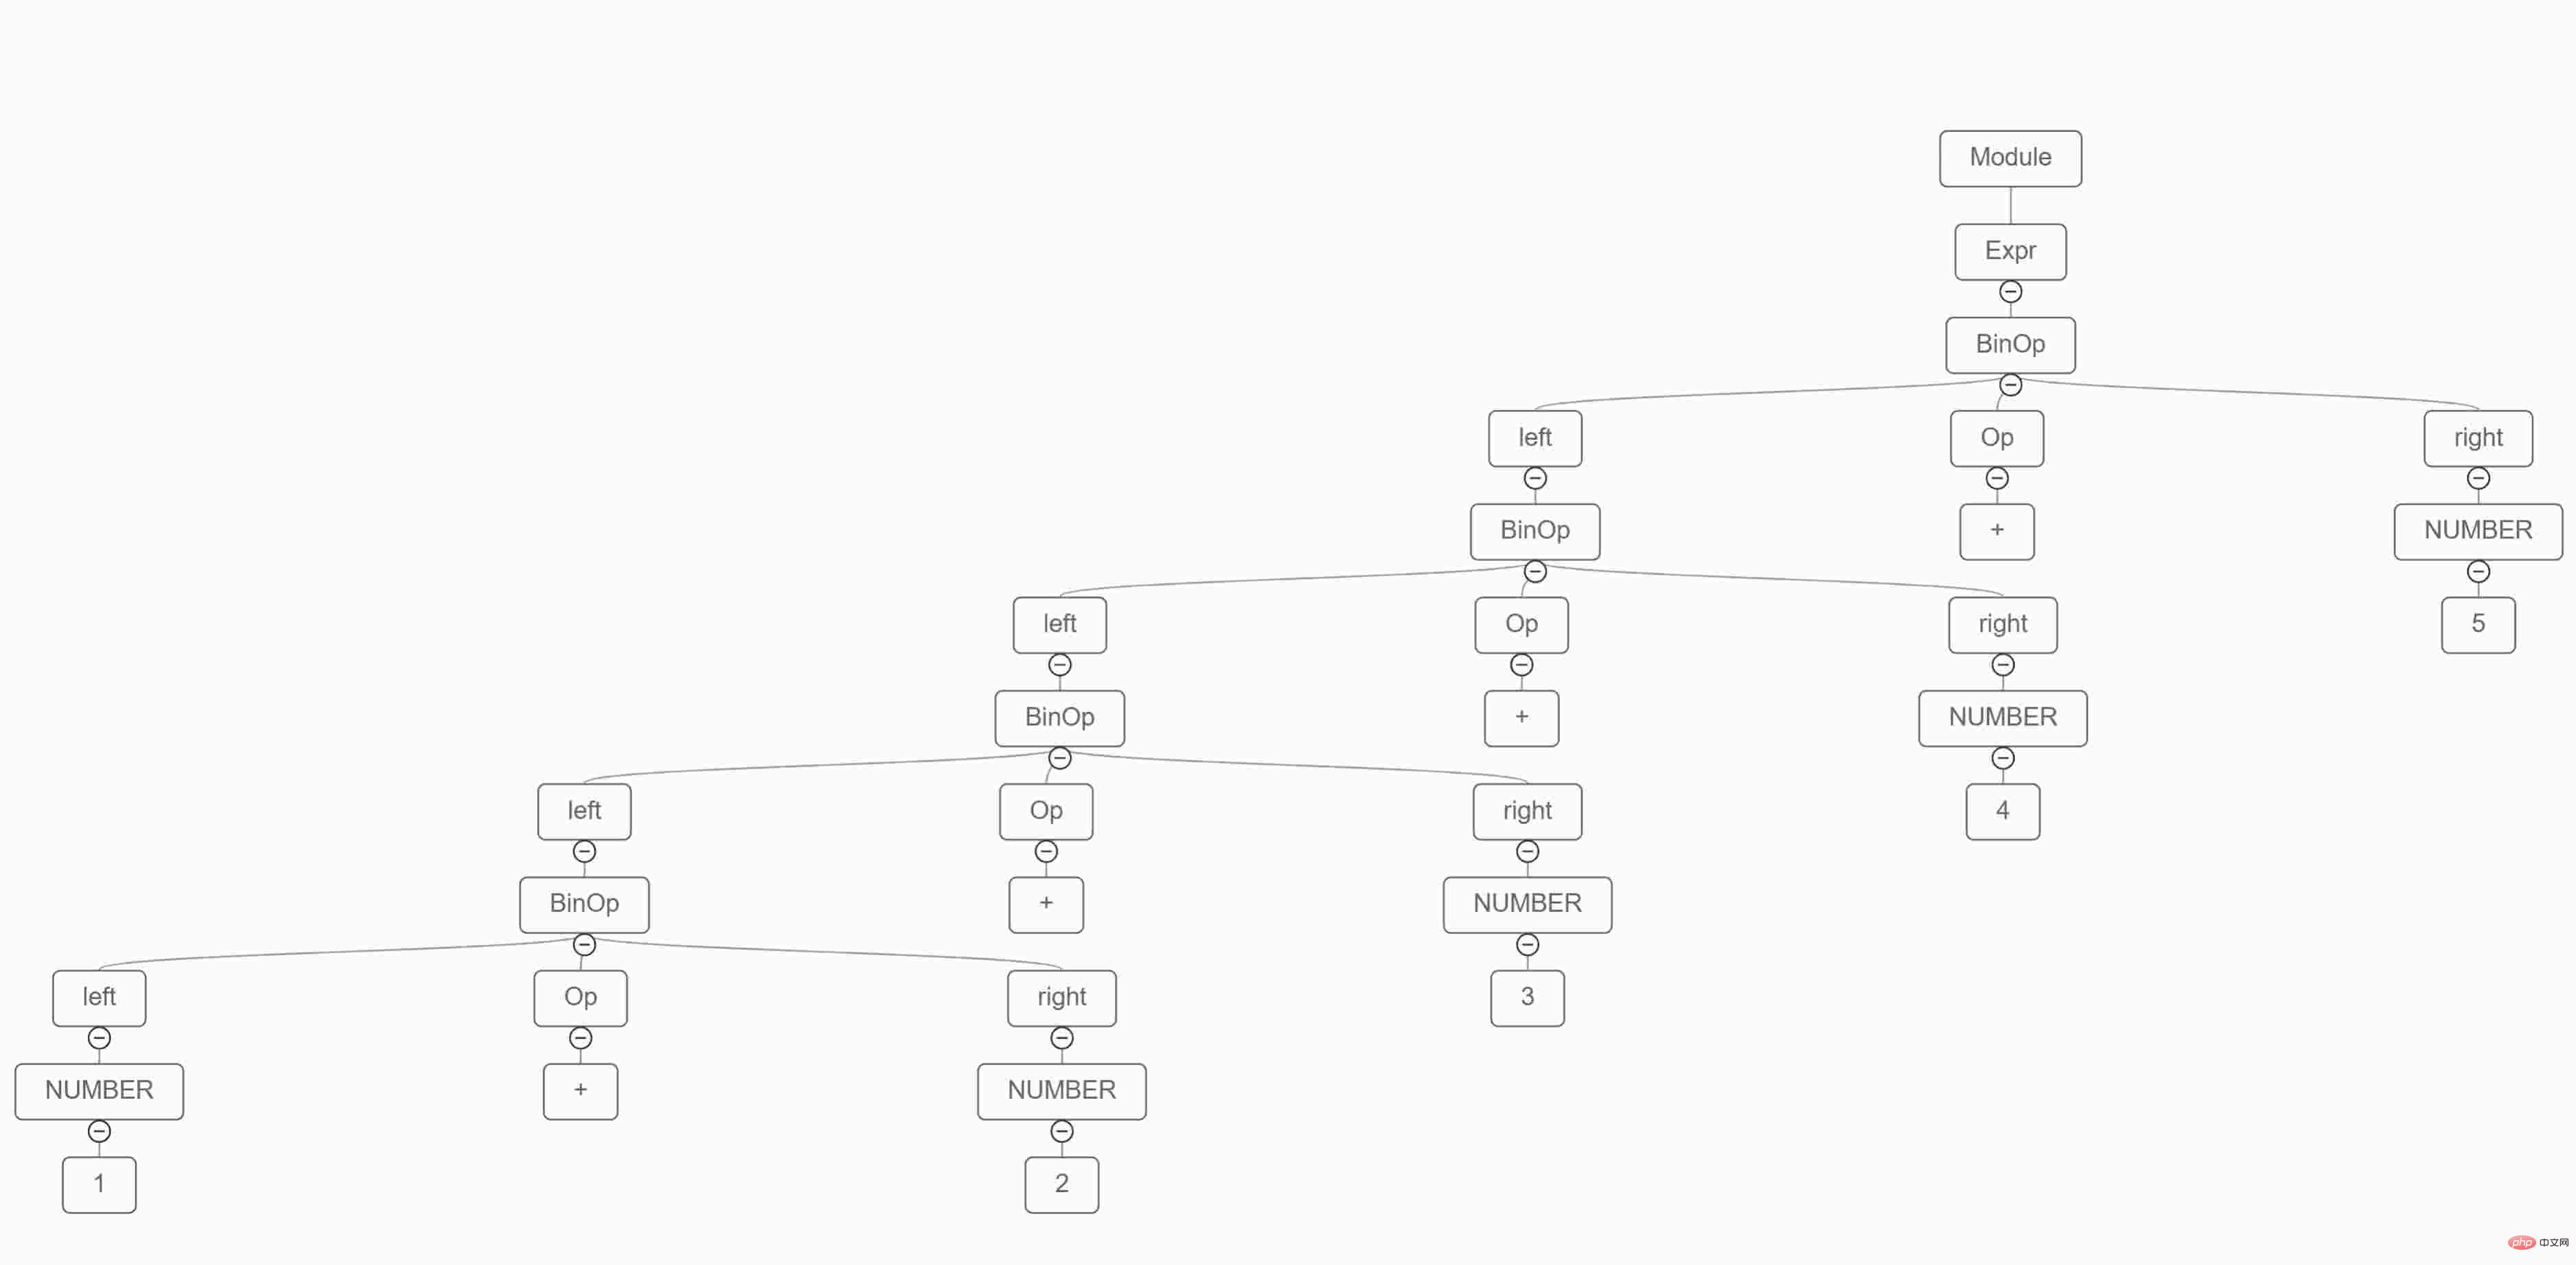 How to realize the visualization of syntax tree of simple four arithmetic operations in python